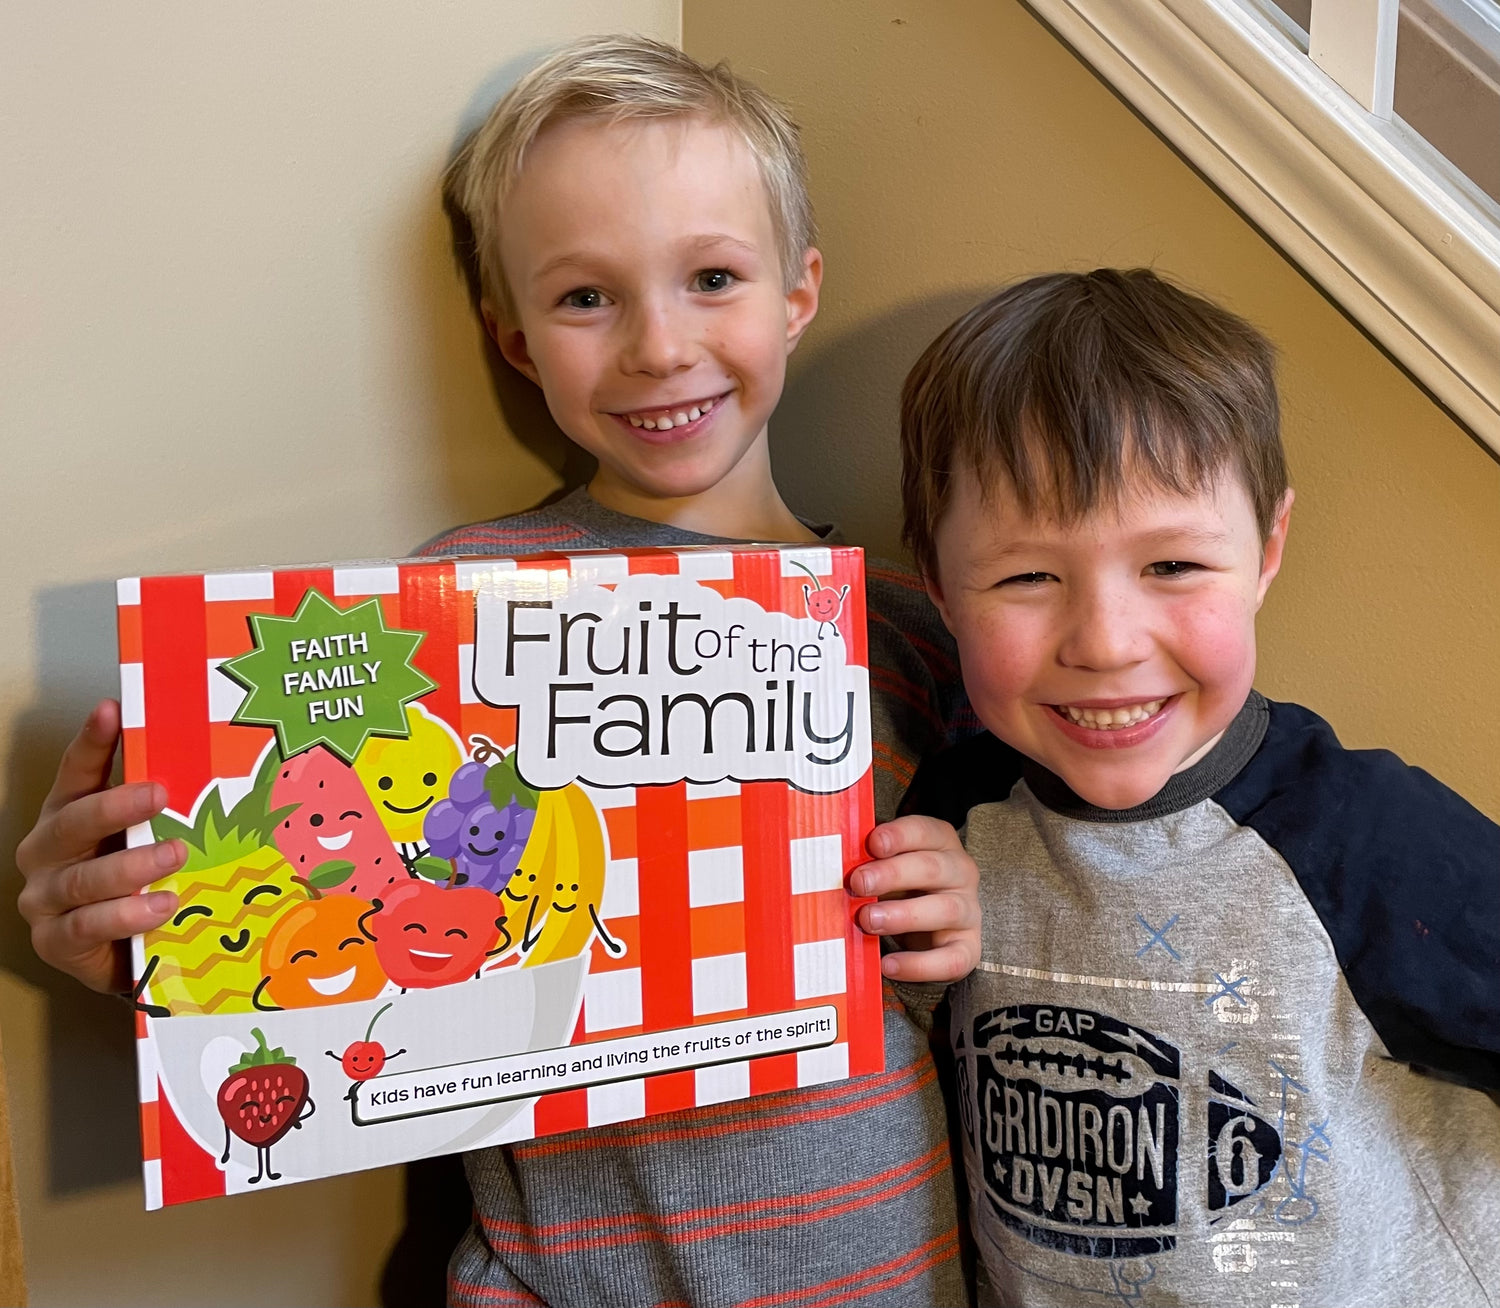 Two little boys standing side by side. One boy is holding a red and white checkered box with the name Fruit of the Family on it. The box also has a bowl full of smiling fruit with the words "faith, family, fun" above it. 